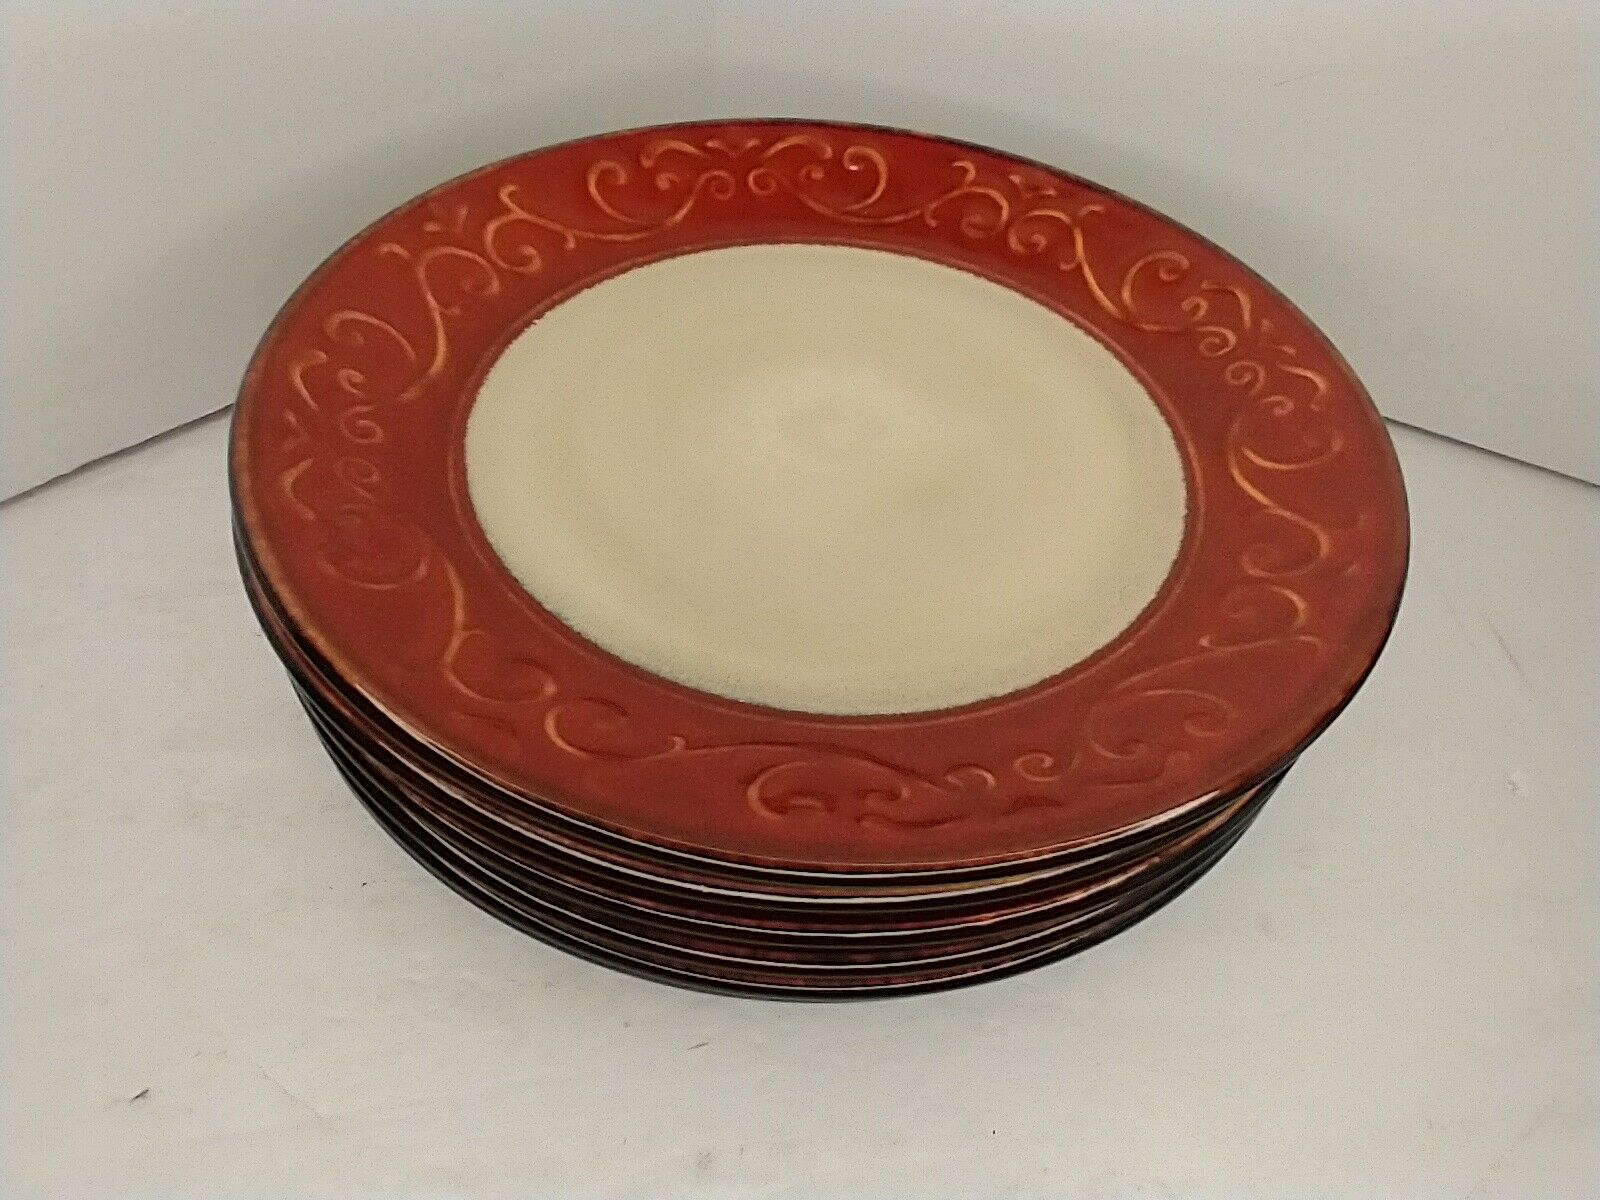 6 - Pier 1 Import Stoneware Red Scroll Salad Plates